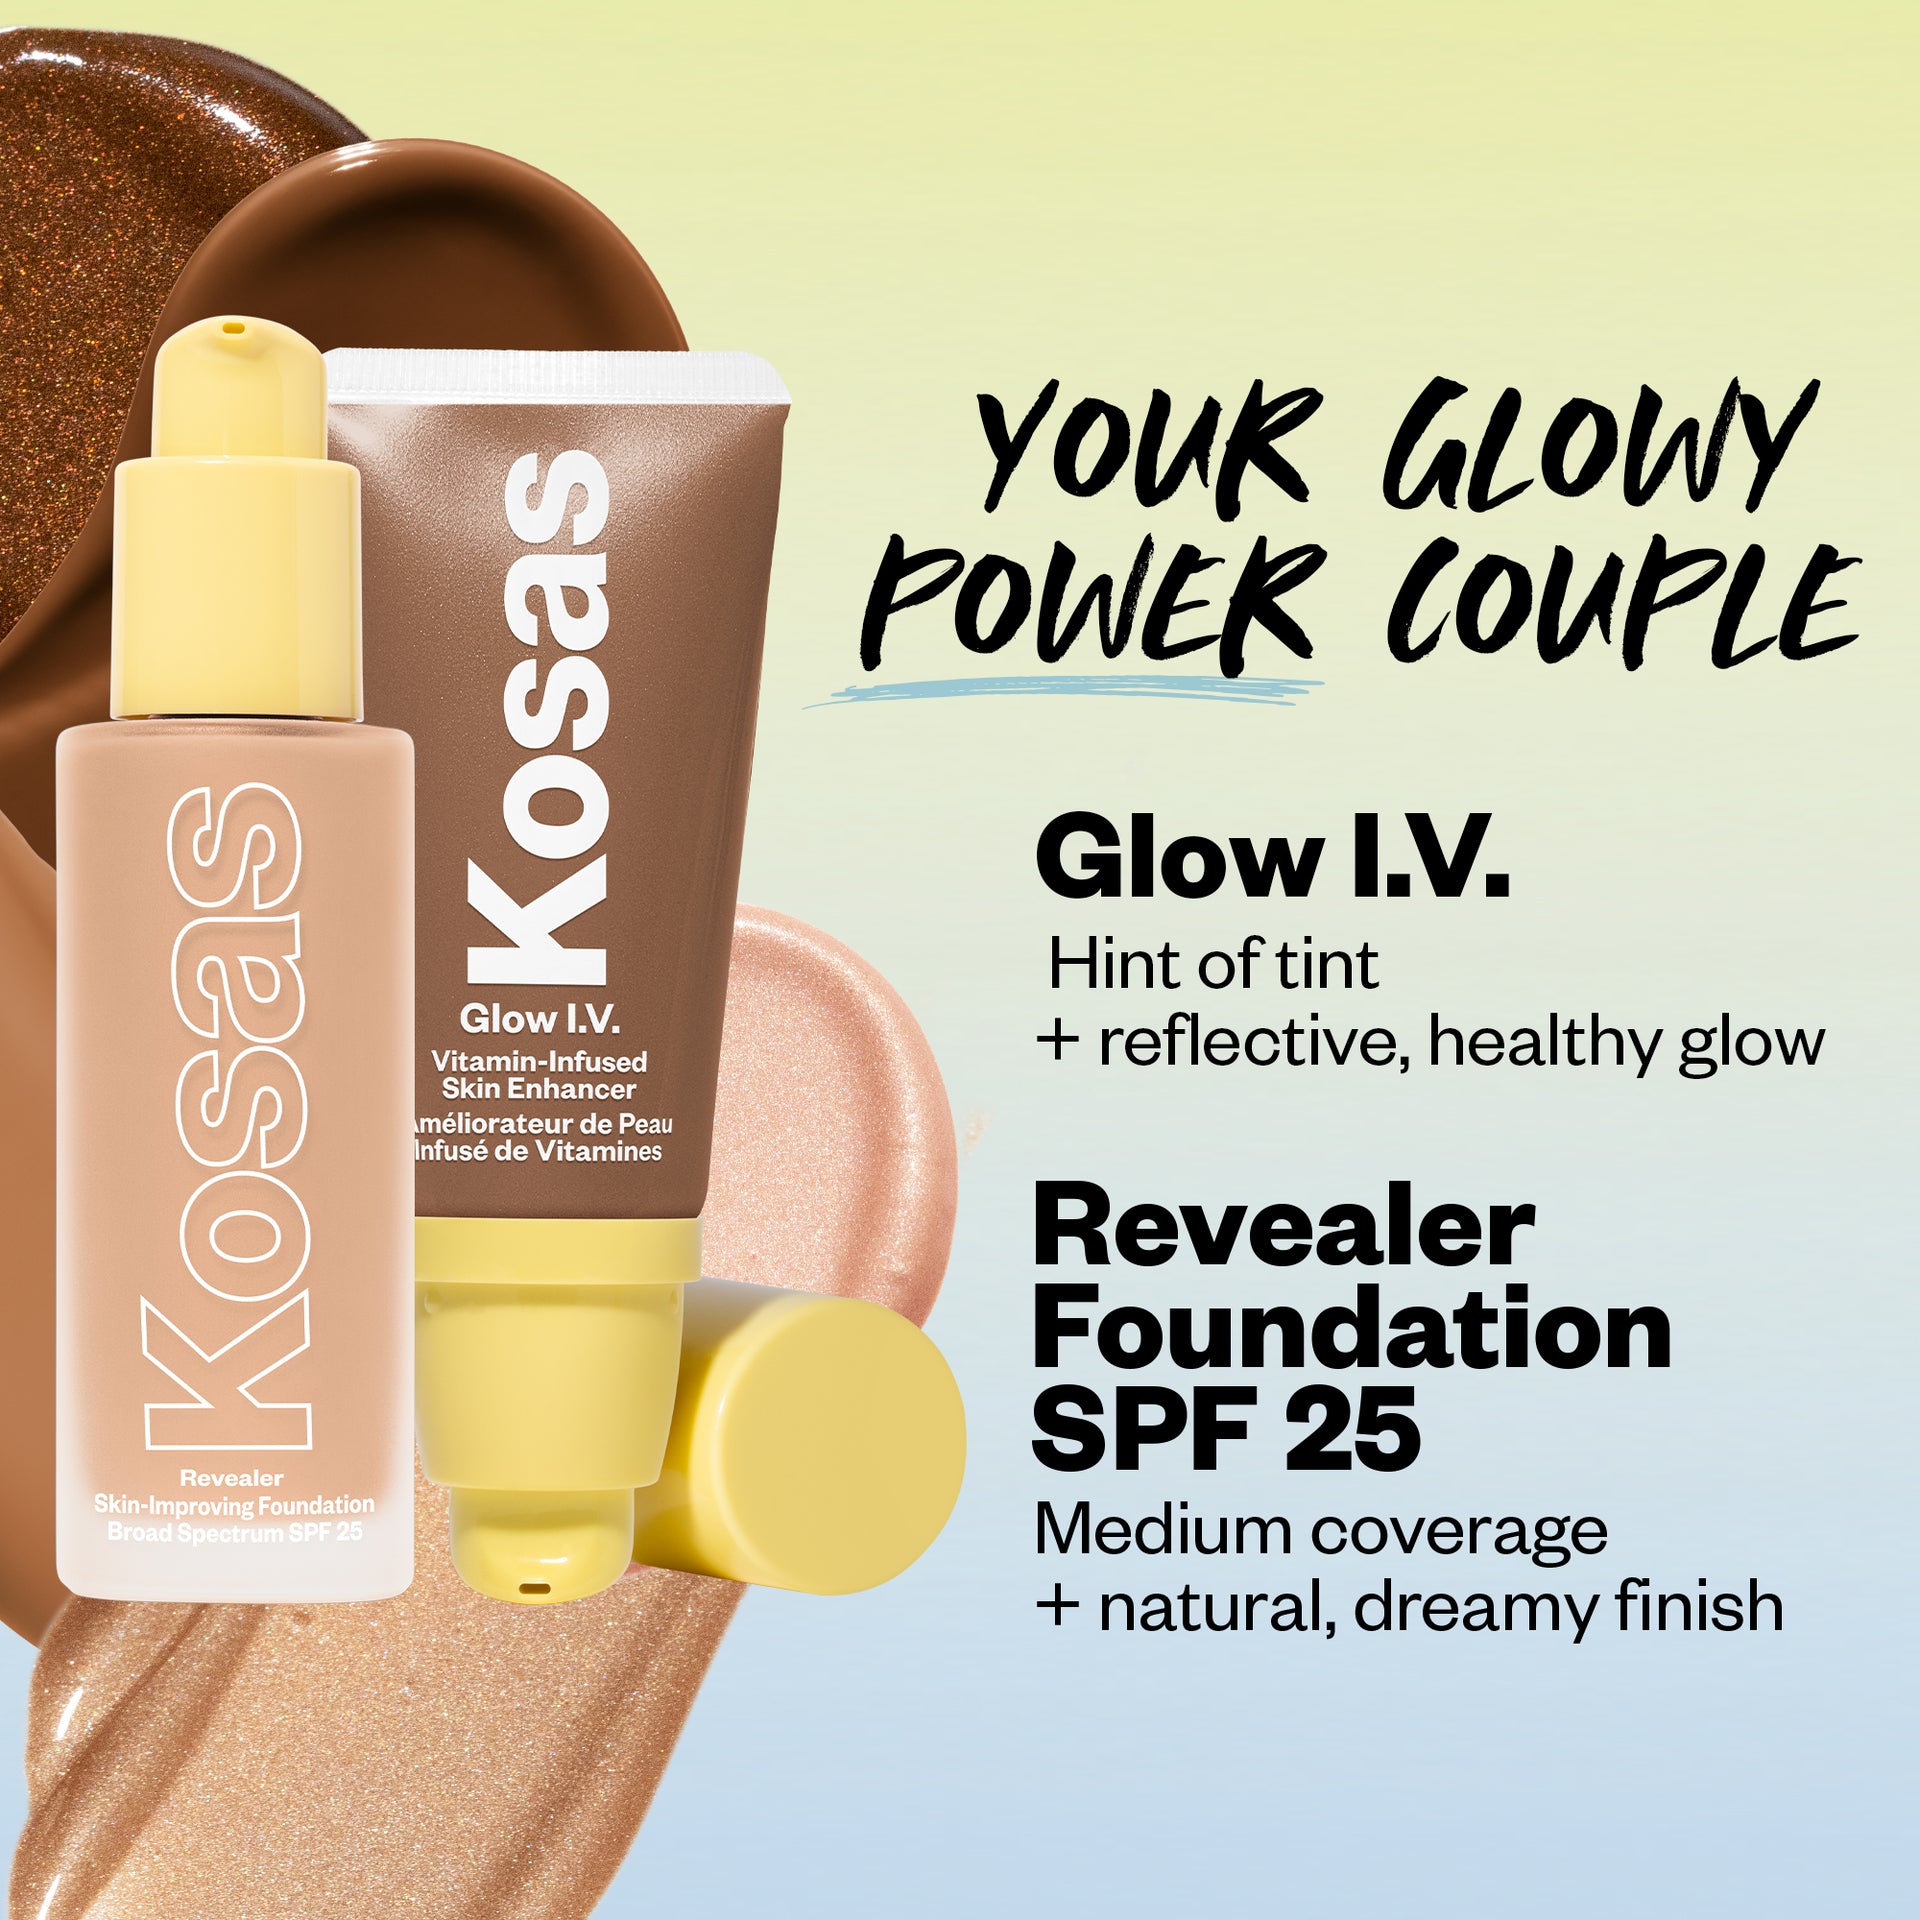 Your Glowy Power Couple. Hint of tint +reflective, healthy glow. Revealer Foundation SPF 25 medium coverage + natural, dreamy finish